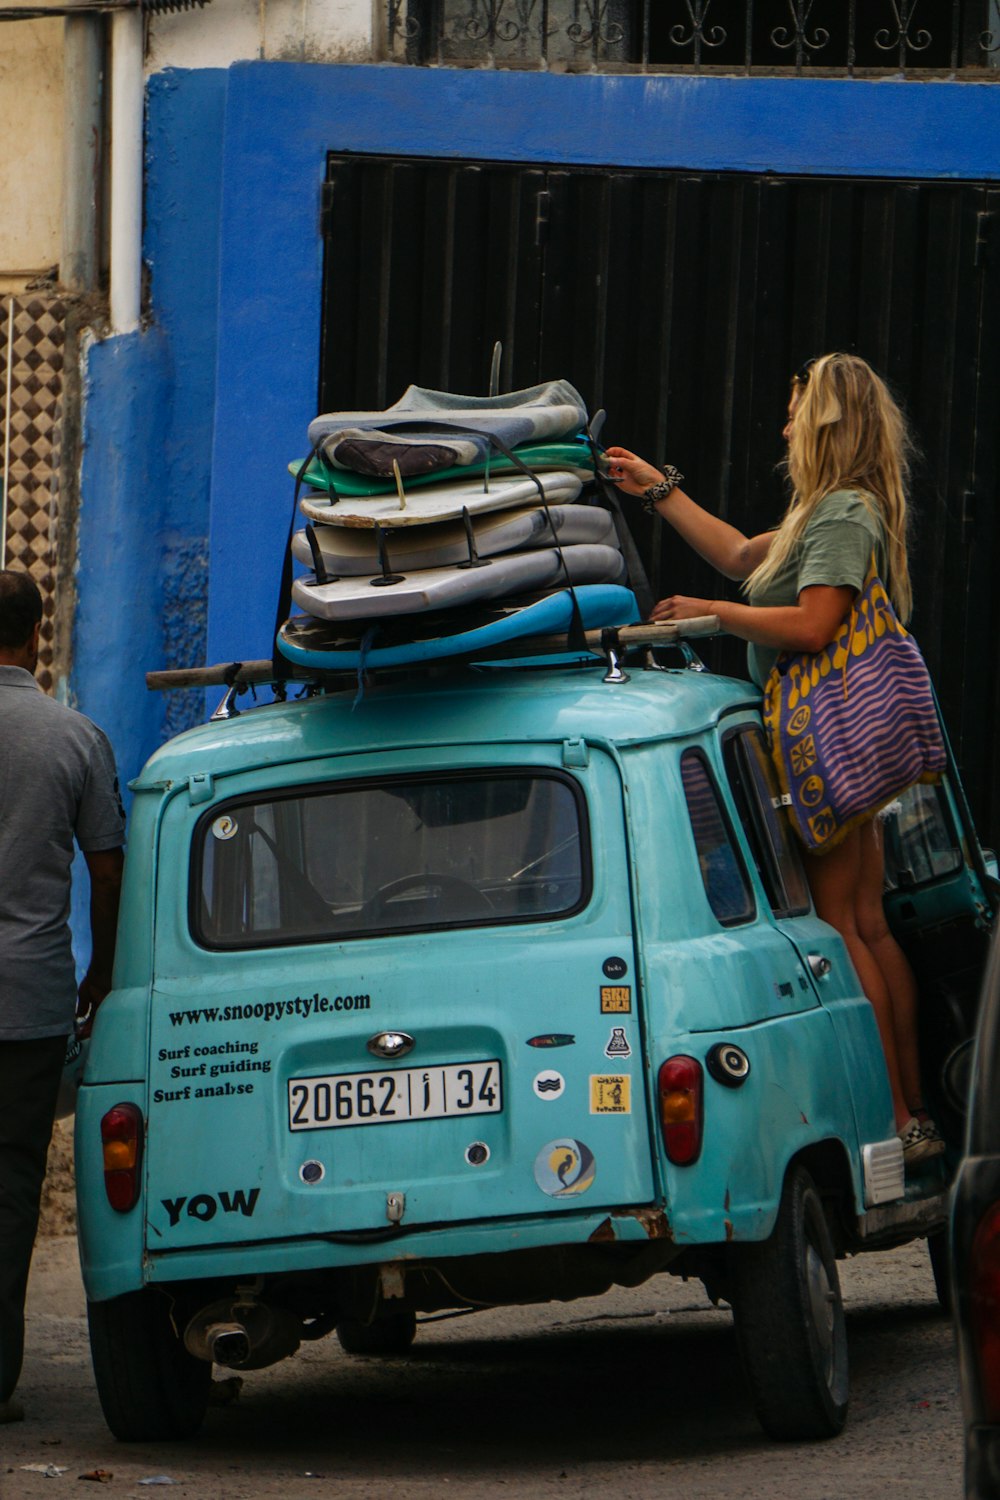 a person standing on the back of a van with luggage on top